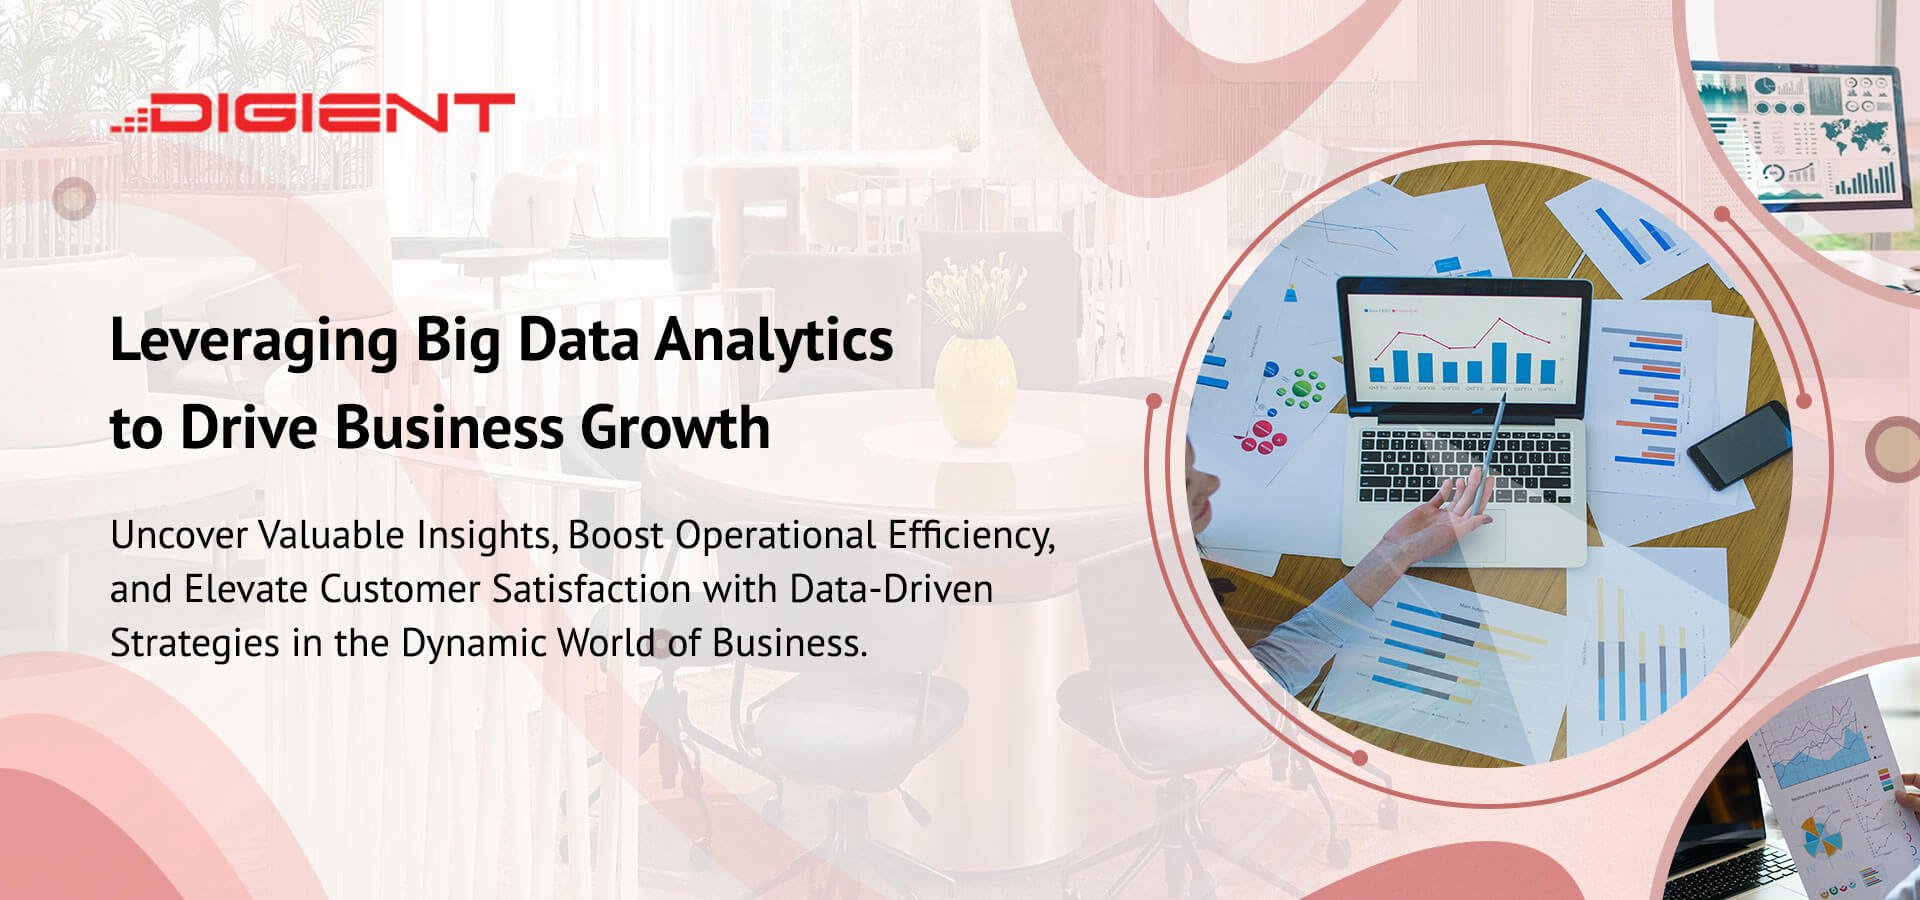  Leveraging Big Data Analytics to Drive Business Growth